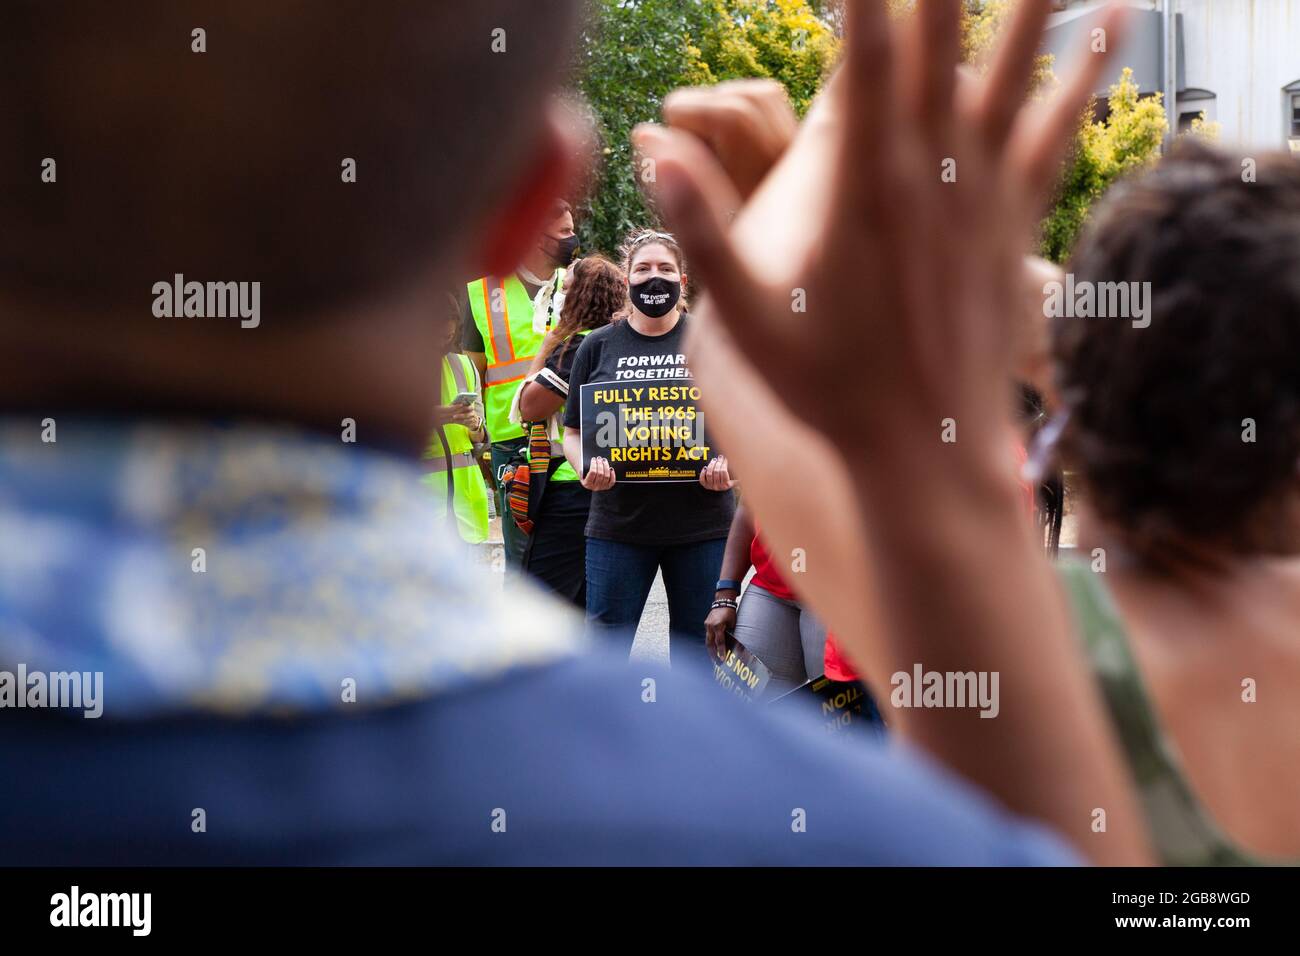 Washington, DC, USA, 2 August 2021.  Pictured: A protester with a sign awaits arrest during a civil disobedience action on Constitution Avenue, while other protesters sing and dance in support.  The Moral Monday March was sponsored by the Poor People’s Campaign, Kairos Center, and Repairers of the Breach.  Credit: Allison Bailey / Alamy Live News Stock Photo